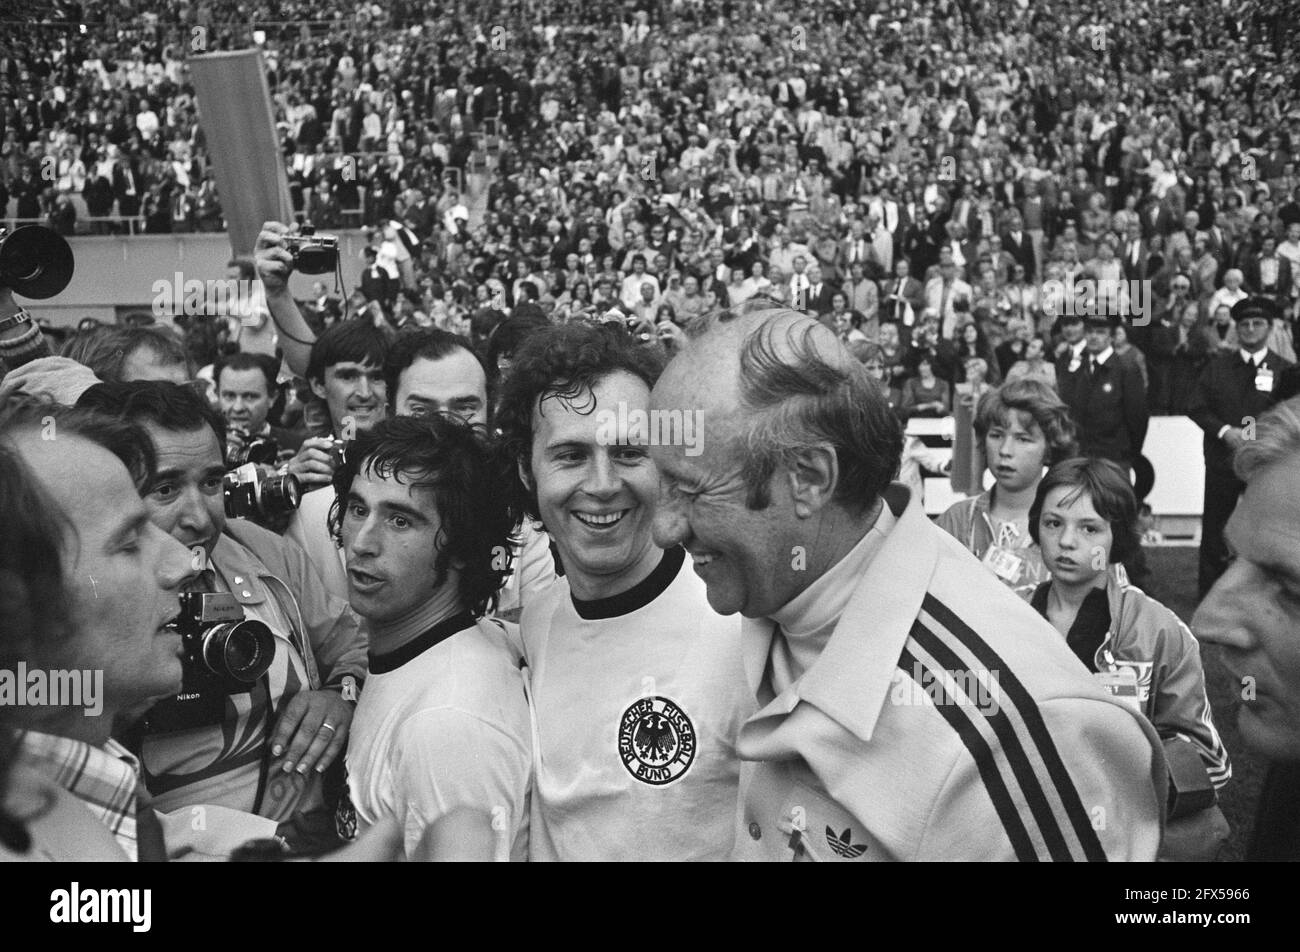 Finals World Cup 1974 in Munich, West Germany against the Netherlands 2-1; l.t.r. Muller, Beckenbauer and trainer Schon afterwards, July 7, 1974, finals, sports, soccer, world championships, The Netherlands, 20th century press agency photo, news to remember, documentary, historic photography 1945-1990, visual stories, human history of the Twentieth Century, capturing moments in time Stock Photo